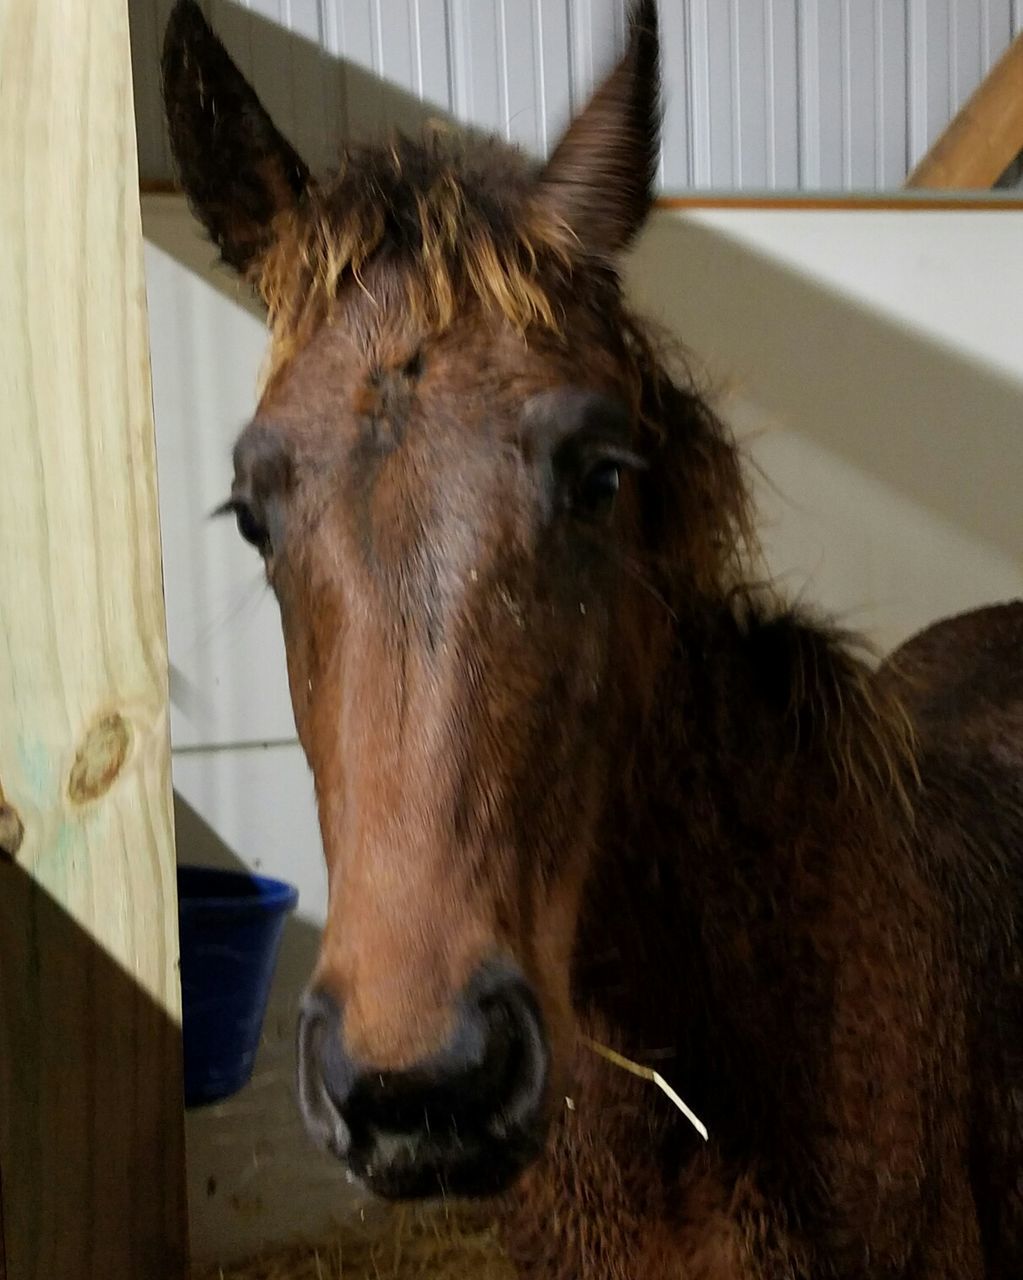 CLOSE-UP OF HORSE IN STABLE